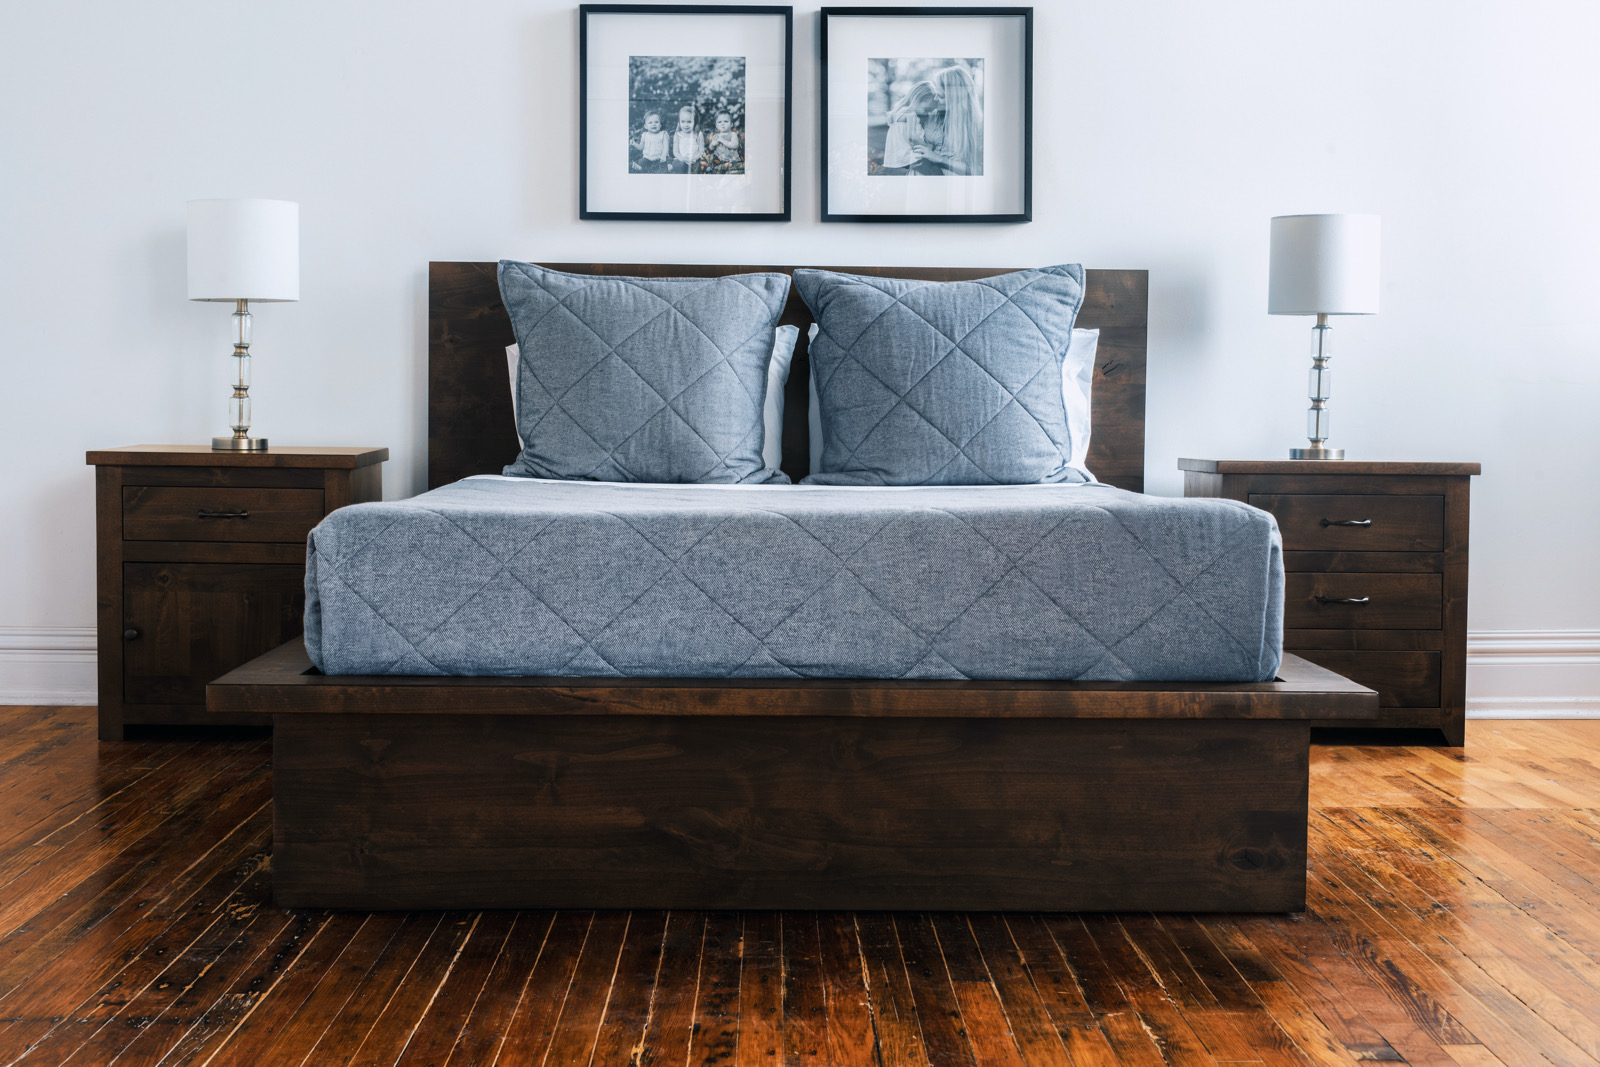 The perfect platform bed frame - The Bed